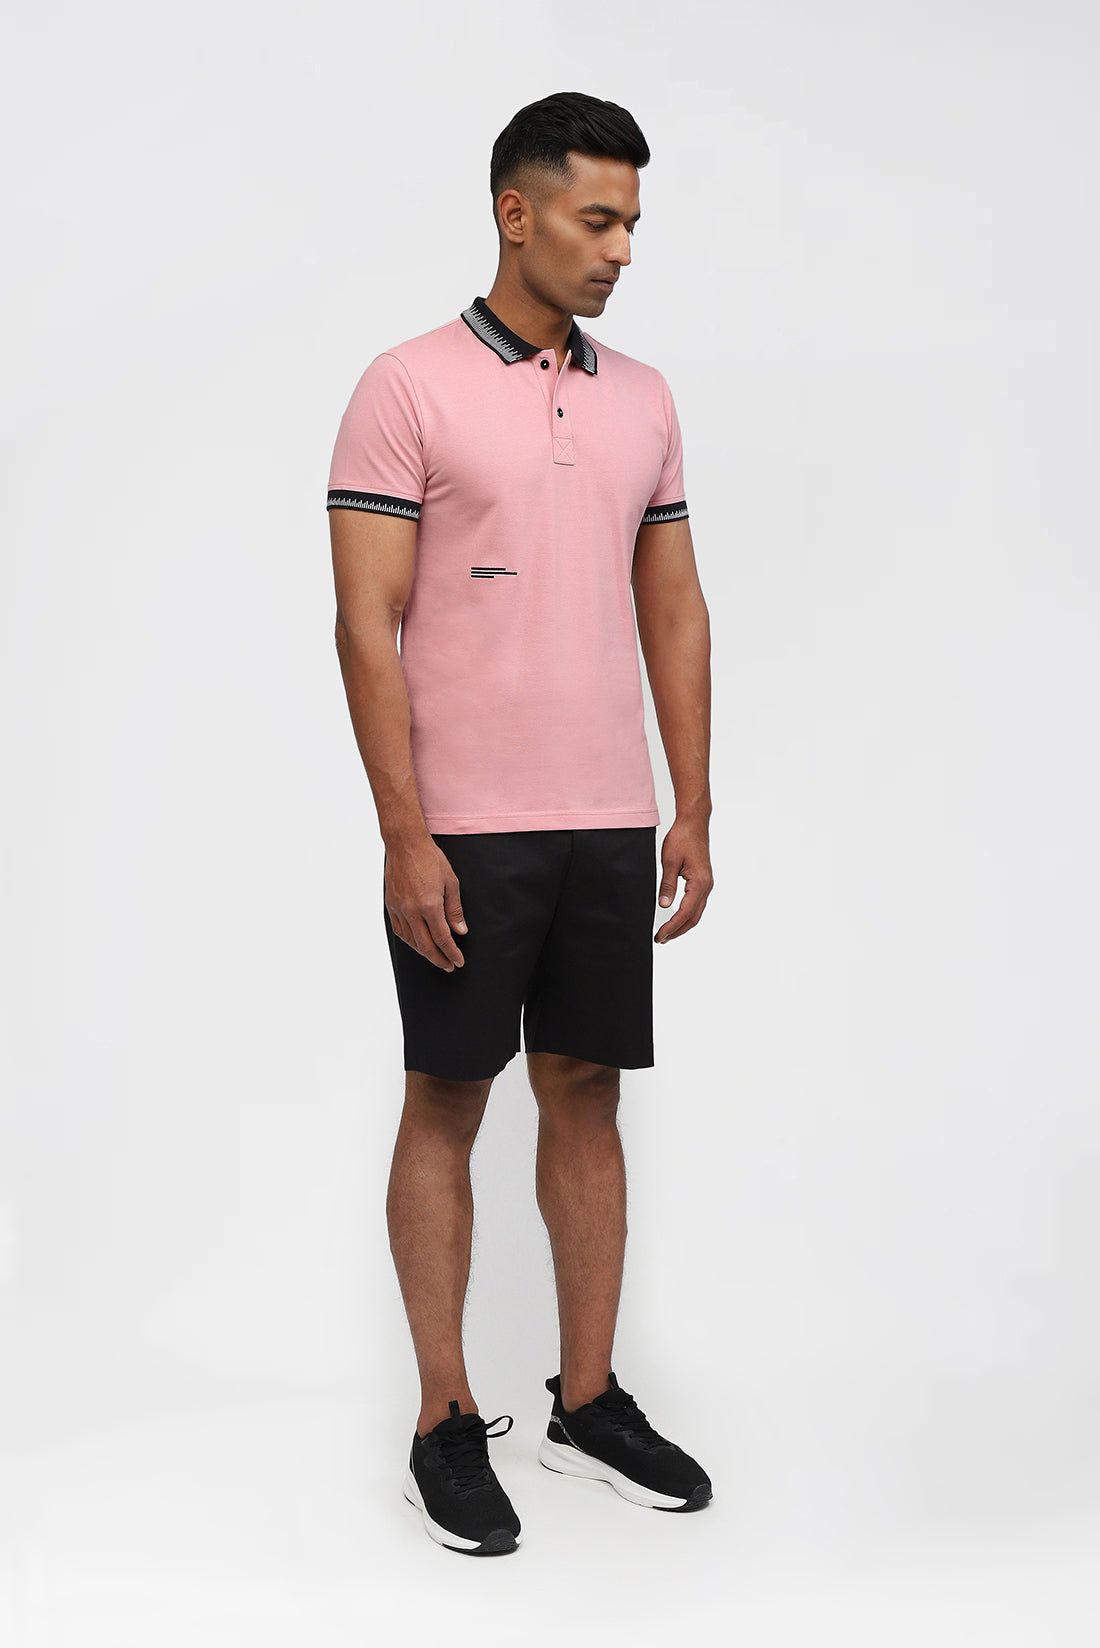 Casuals Men's Polo T-Shirt with Genes Monogram